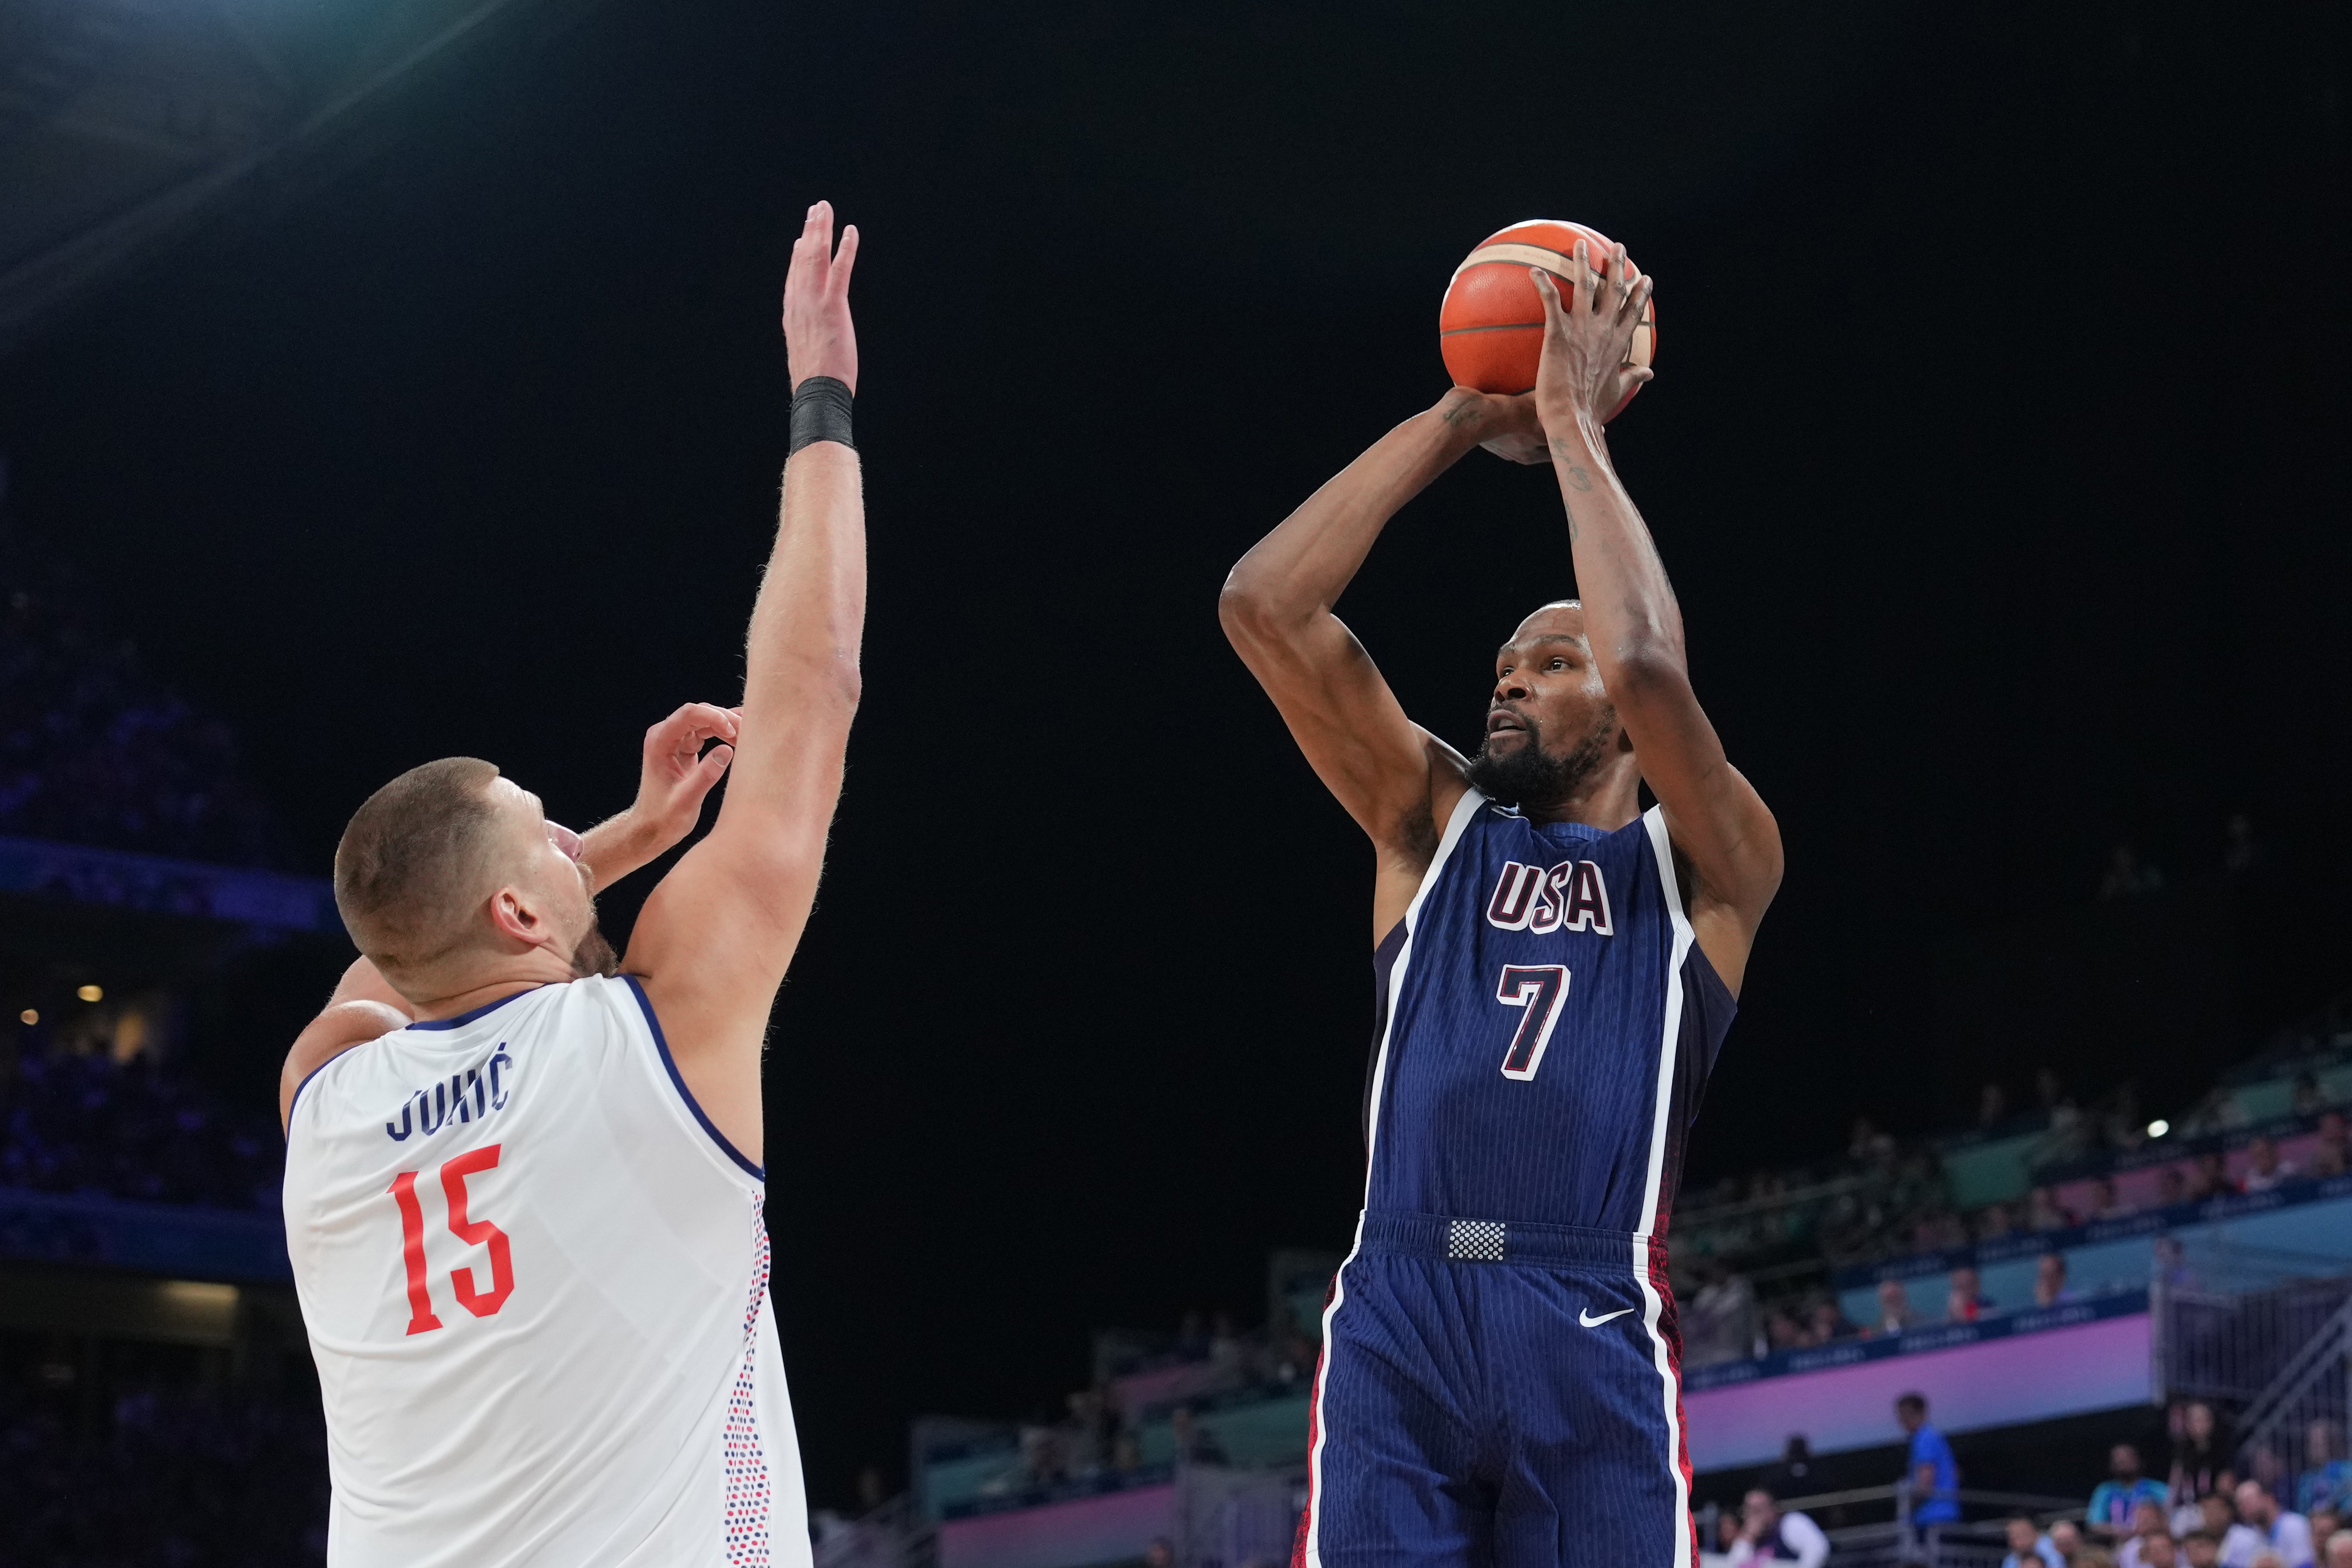 Kevin Durant explodes onto the Olympic court to lead Team USA win over Serbia